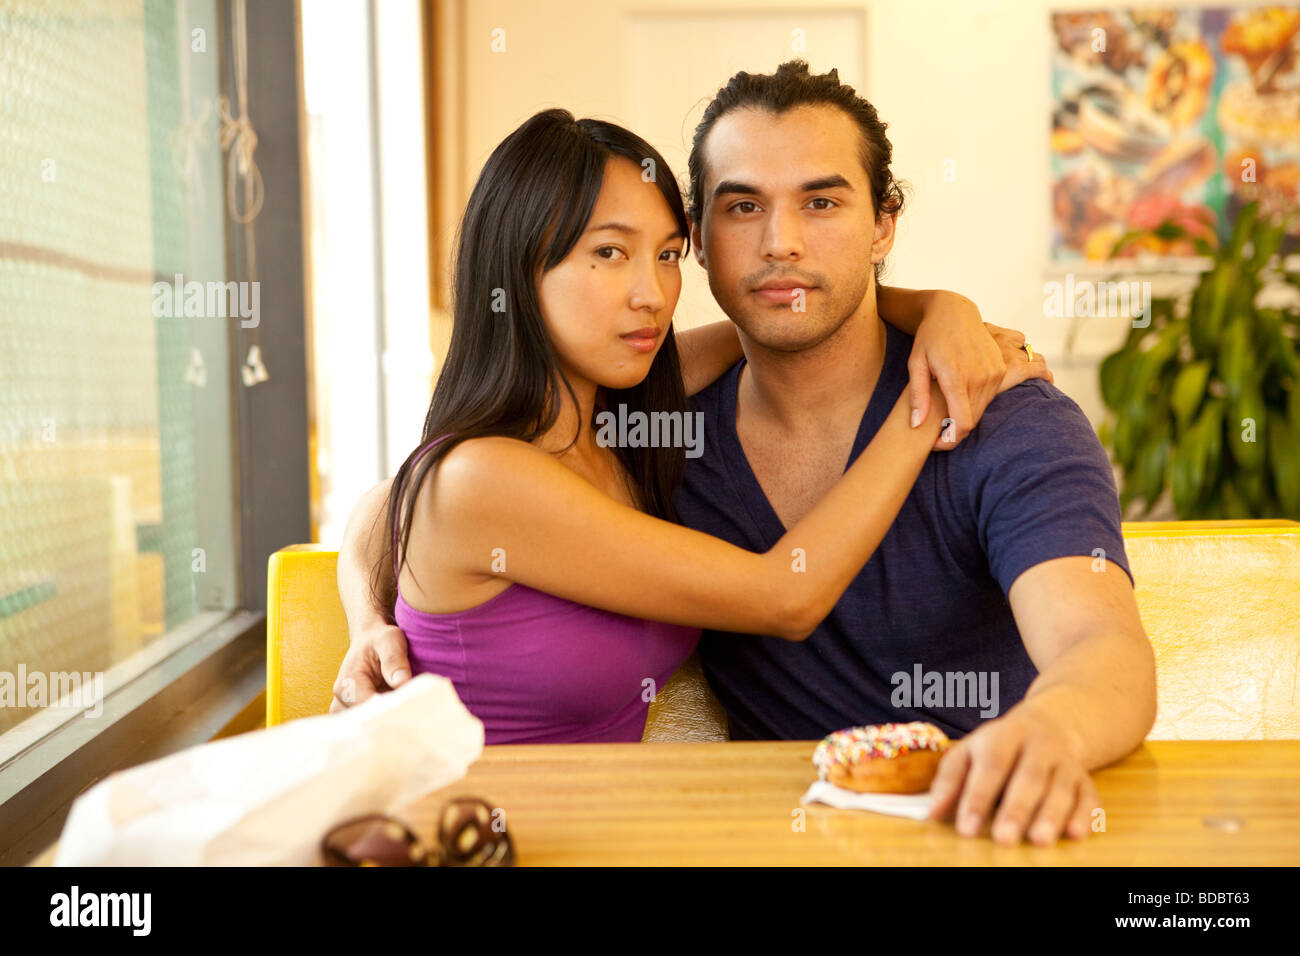 Male Female couple sitting at a table inside a fast food restaurant, looking at camera Stock Photo photo